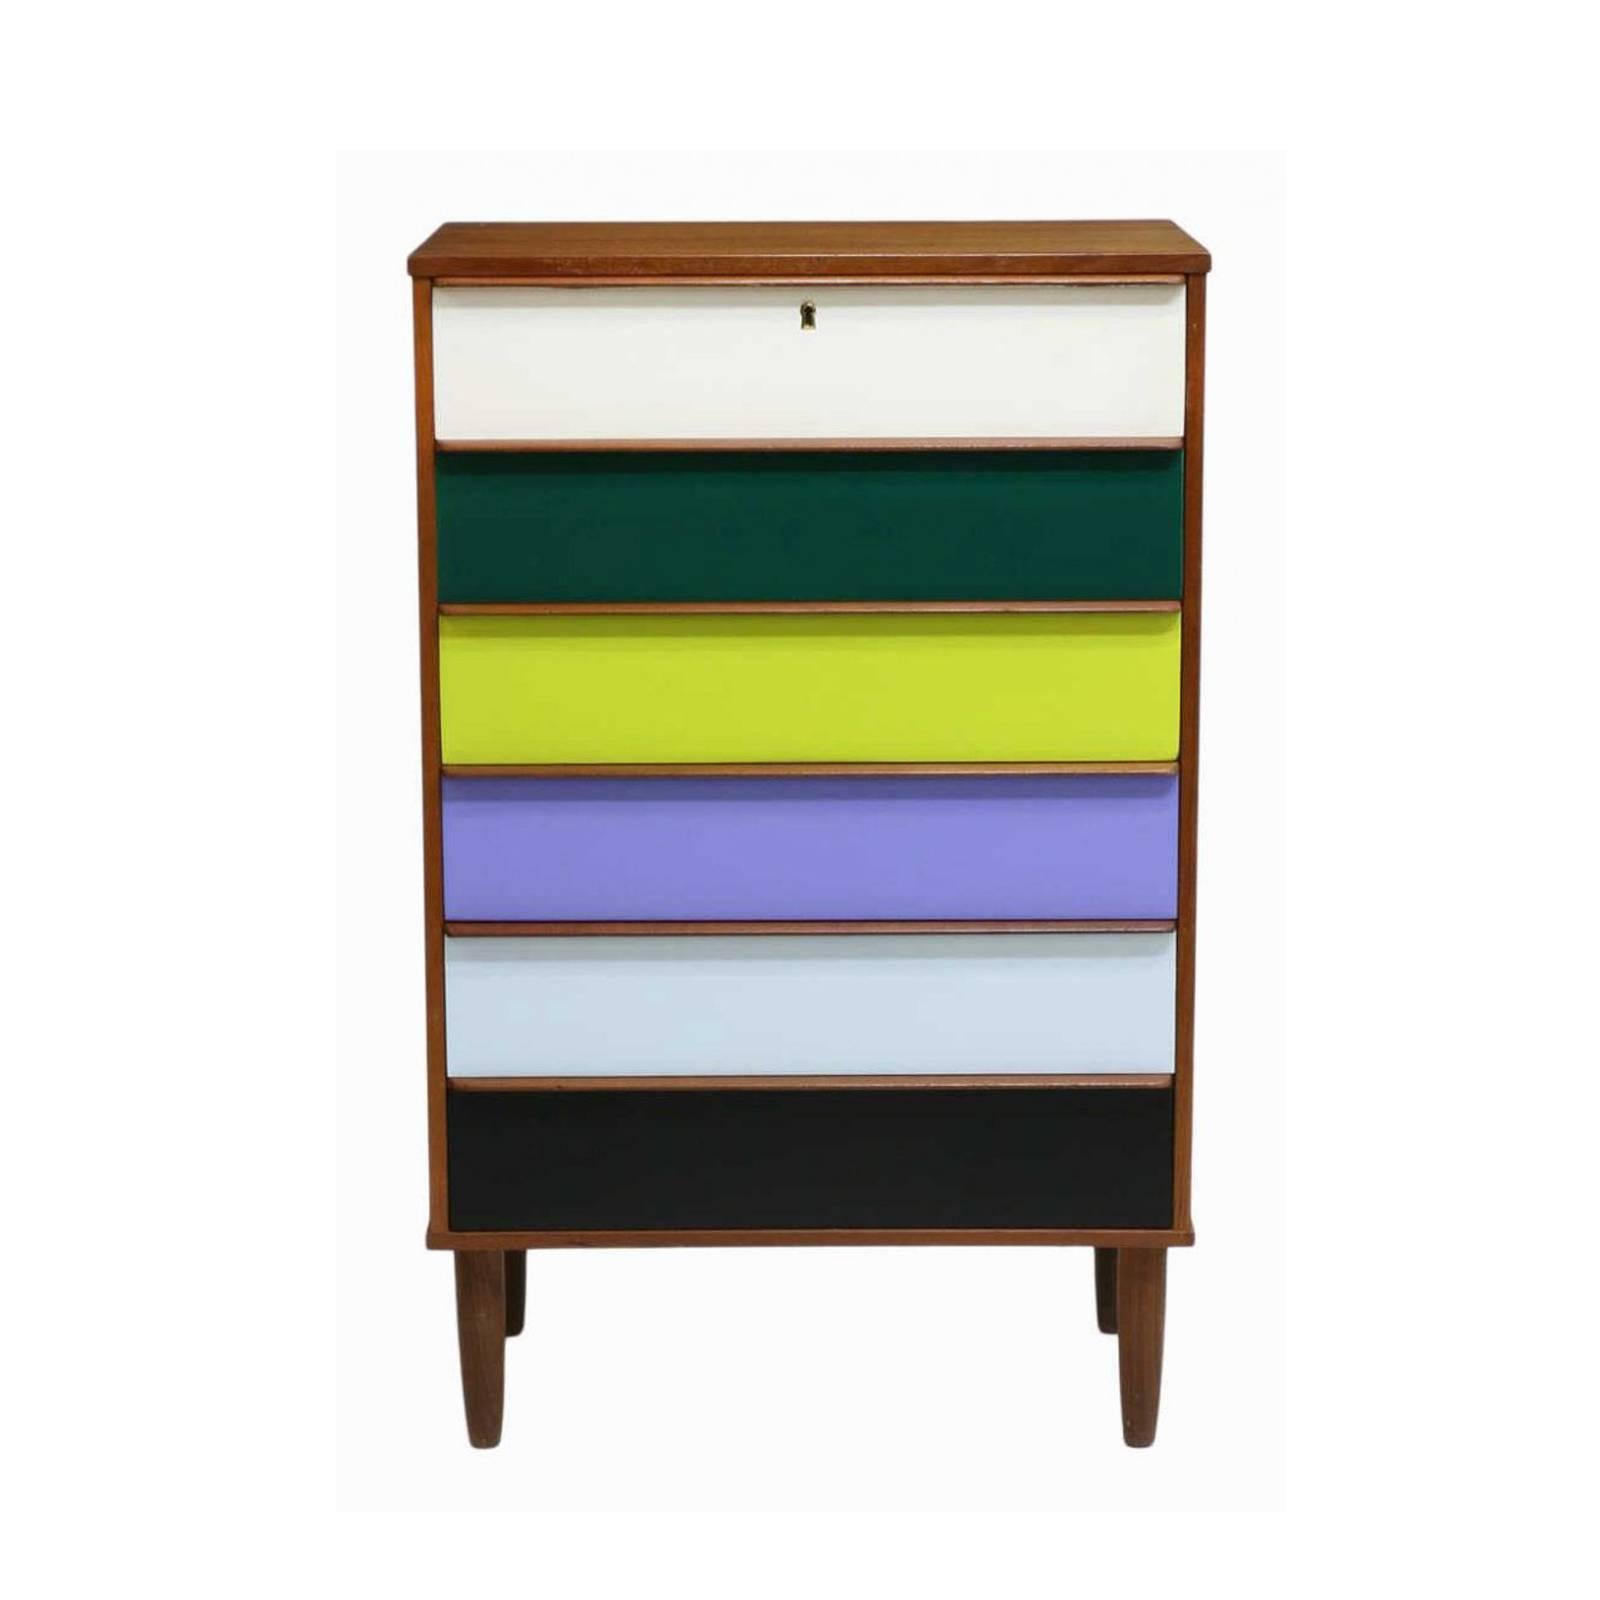 1950s Danish Mid-Century Modern teakwood chest of drawers on tapered legs. Each of the six faces is painted in beautiful different vibrant colors.